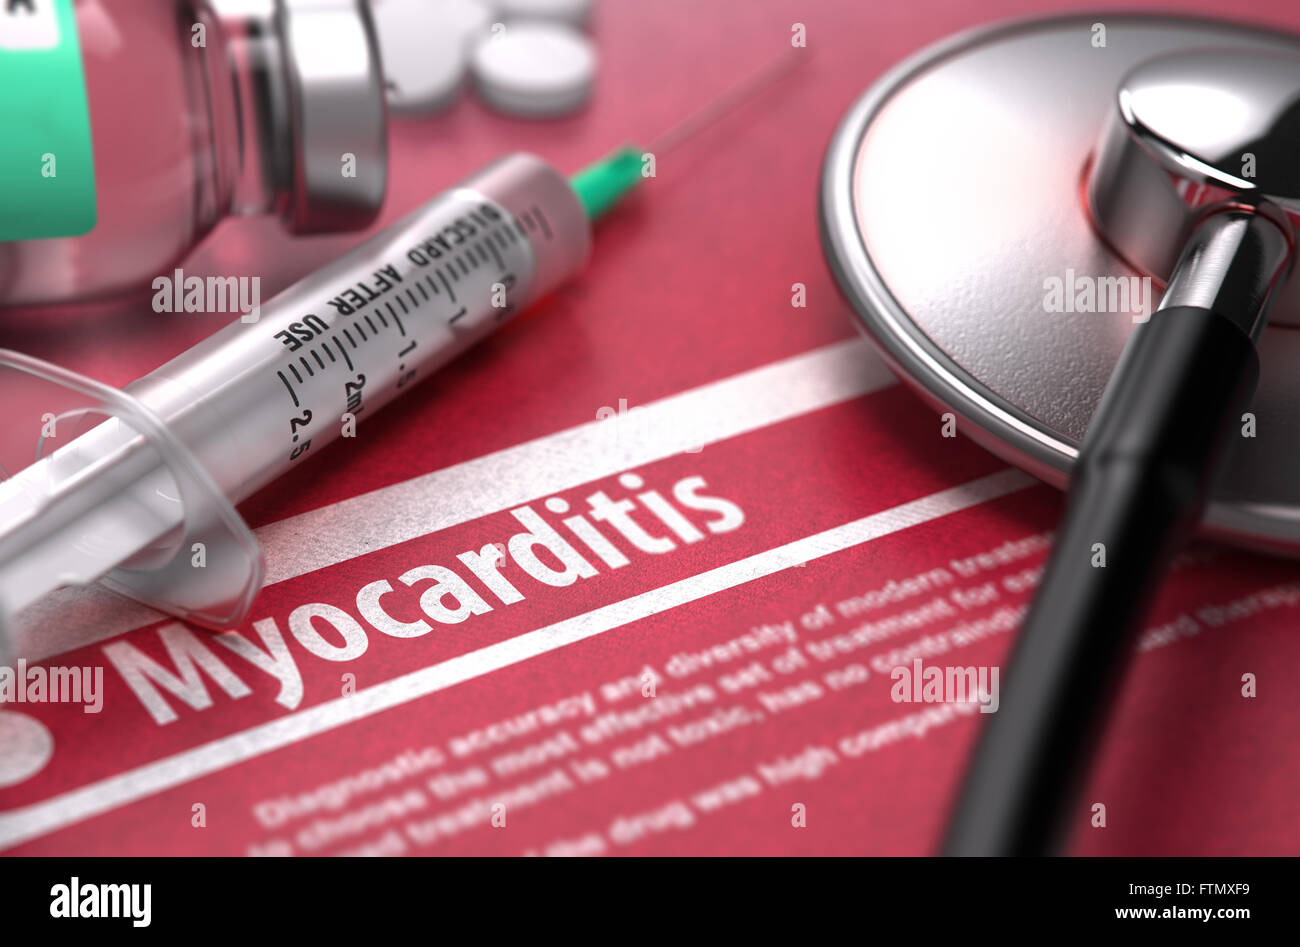 Myocarditis. Medical Concept on Red Background. Stock Photo